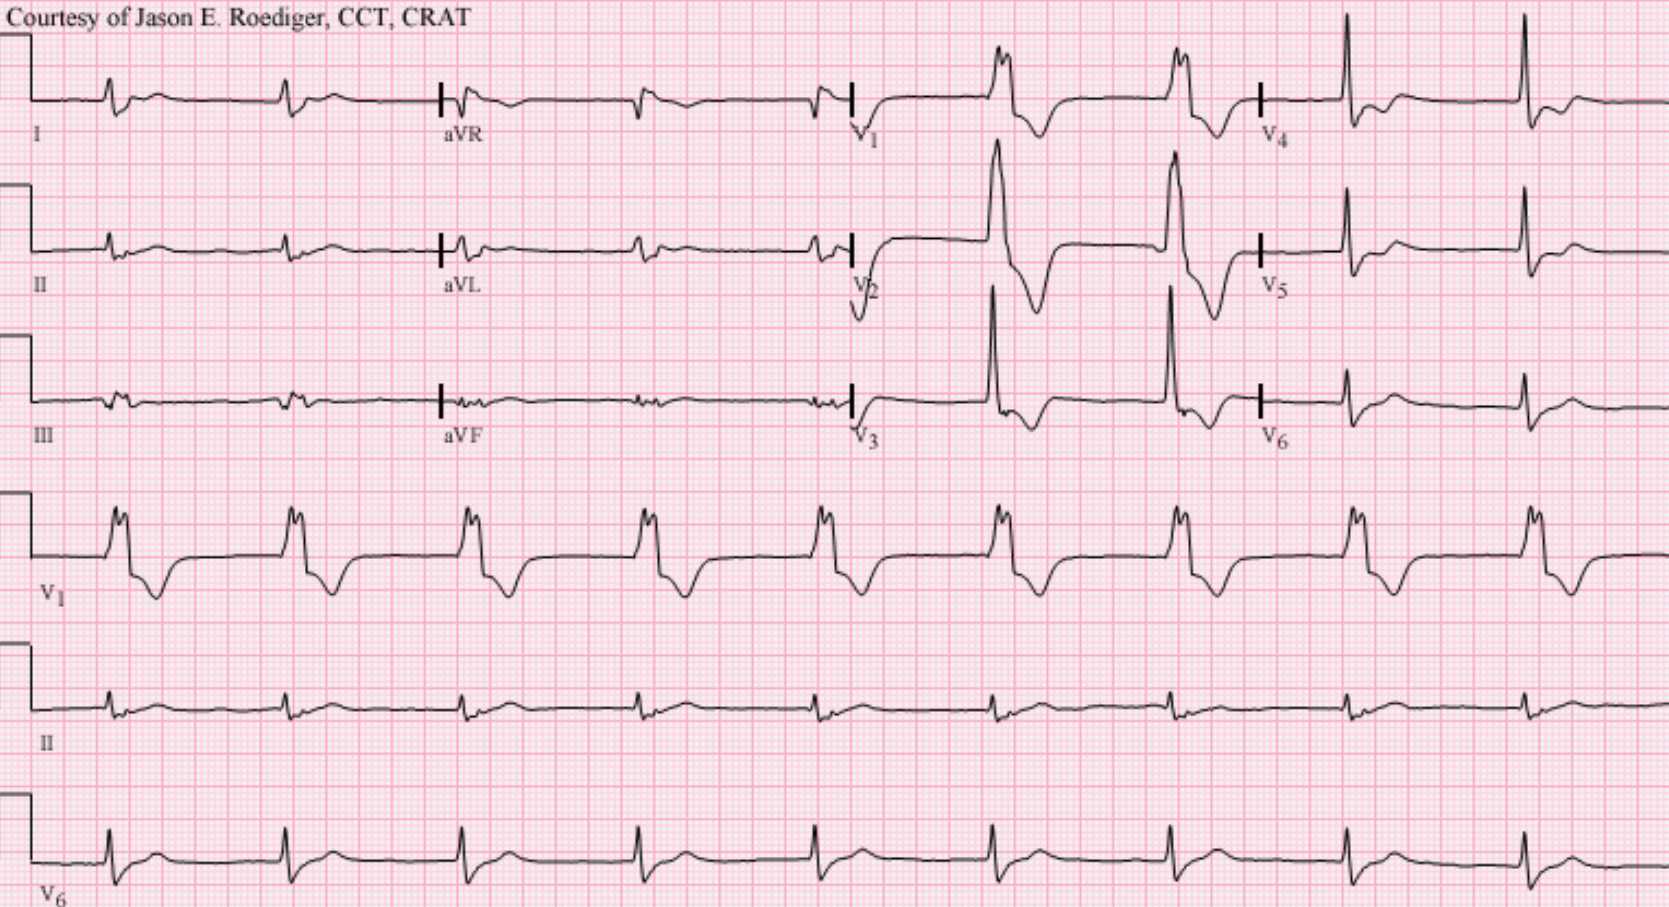 Accelerated idioventricular rhythm (AIVR) at a rate of 55/min presumably originating from the left ventricle (LV)